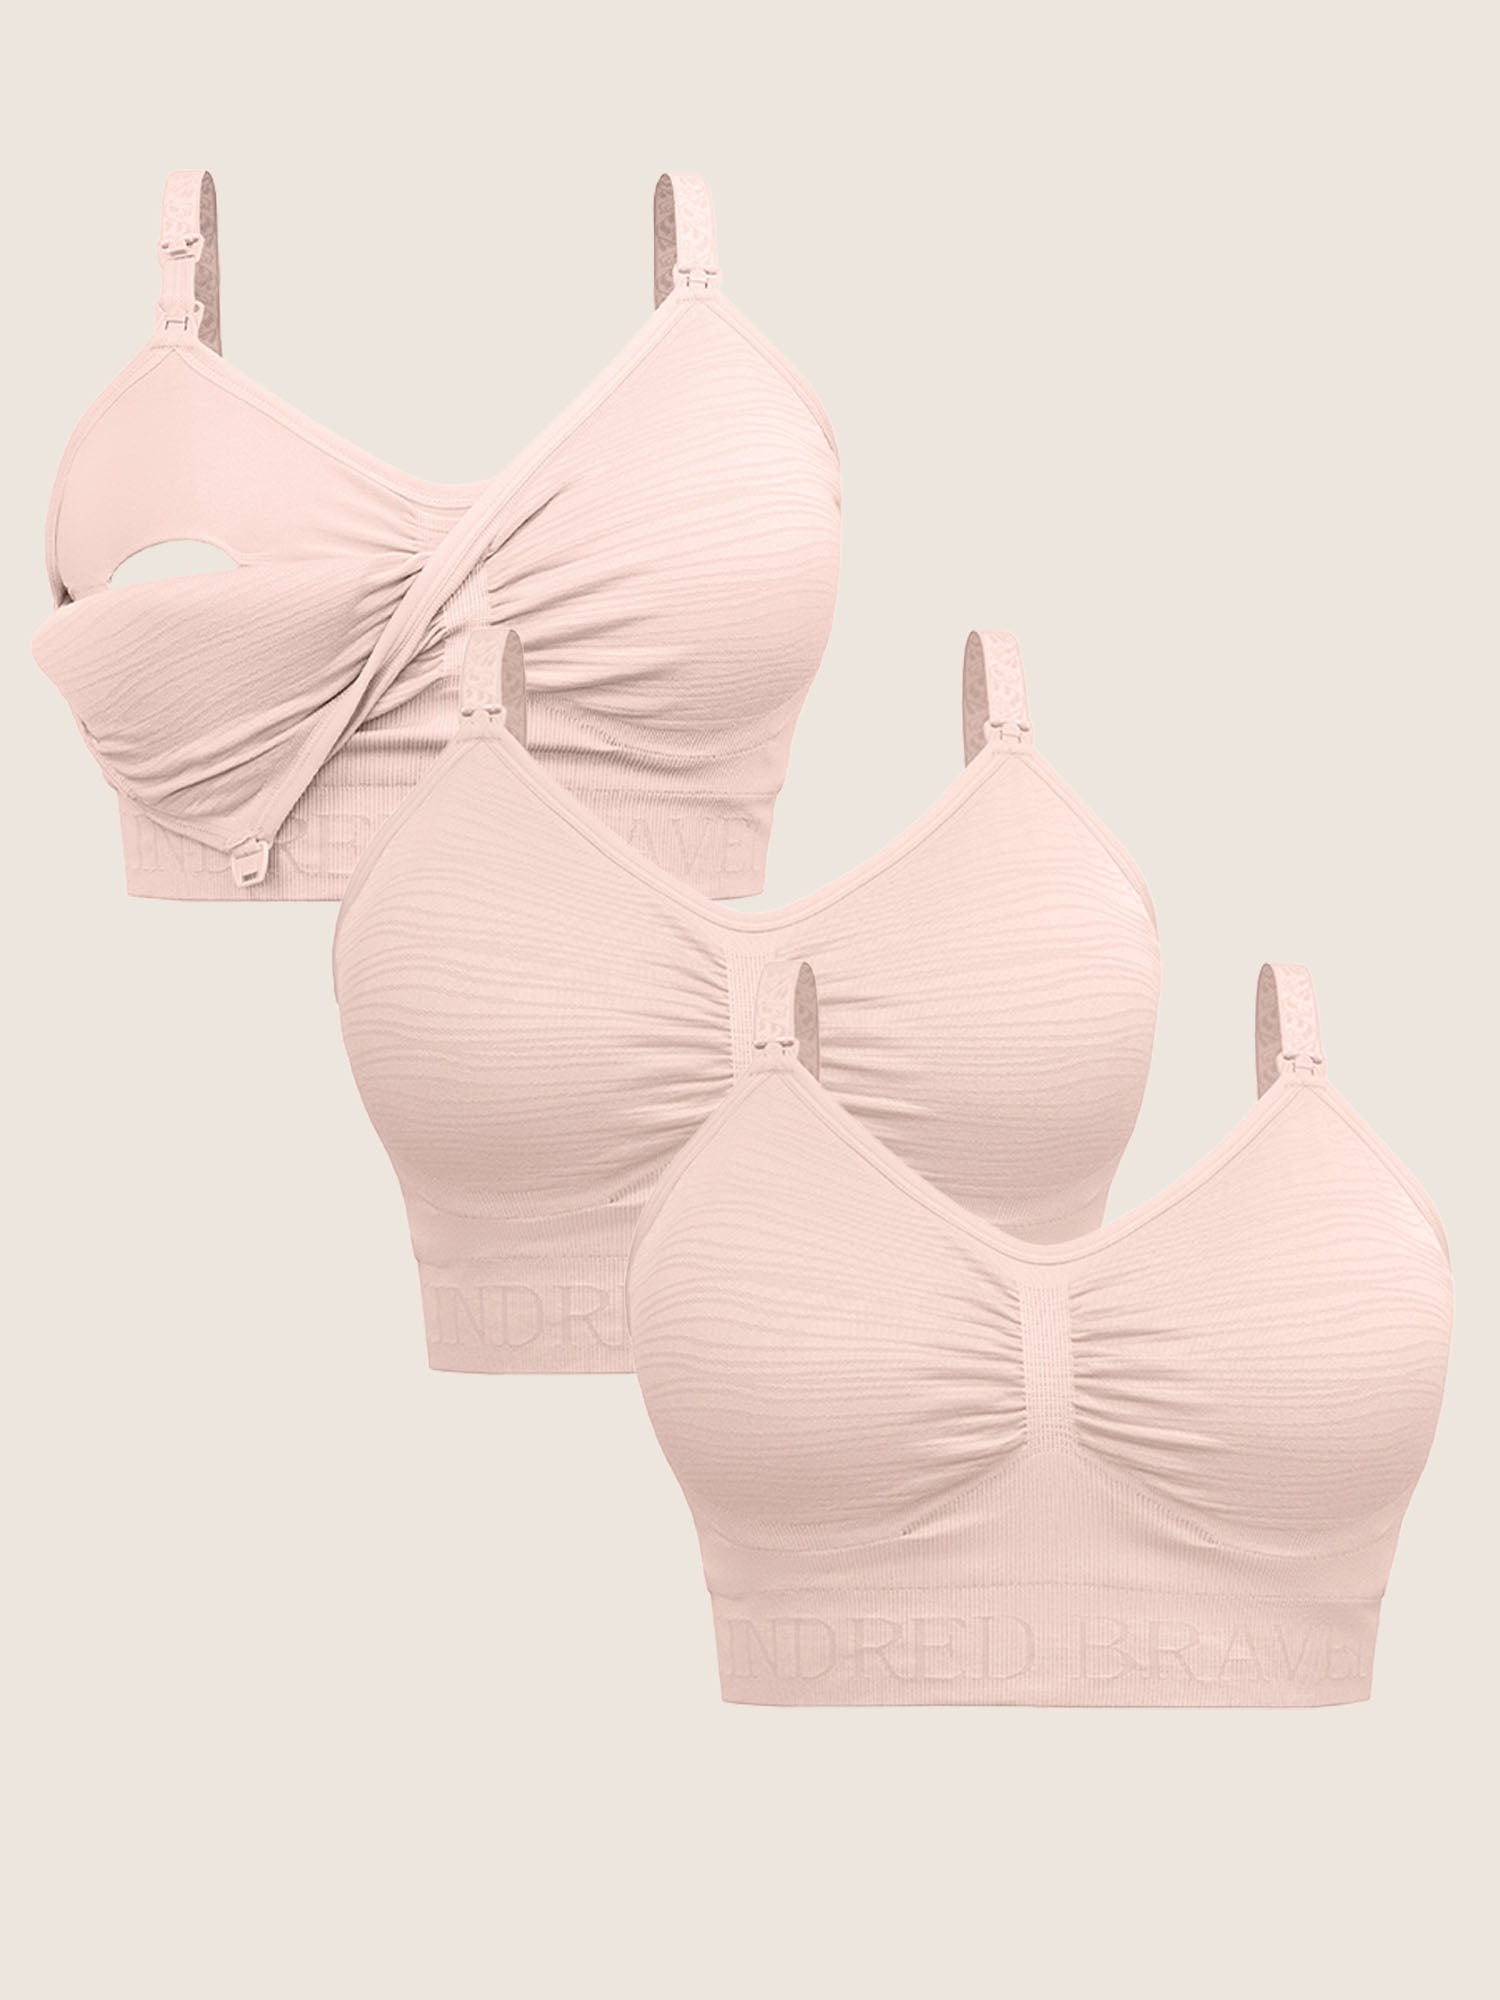 Nina, in her third trimester, is finding her super comfortable bras an